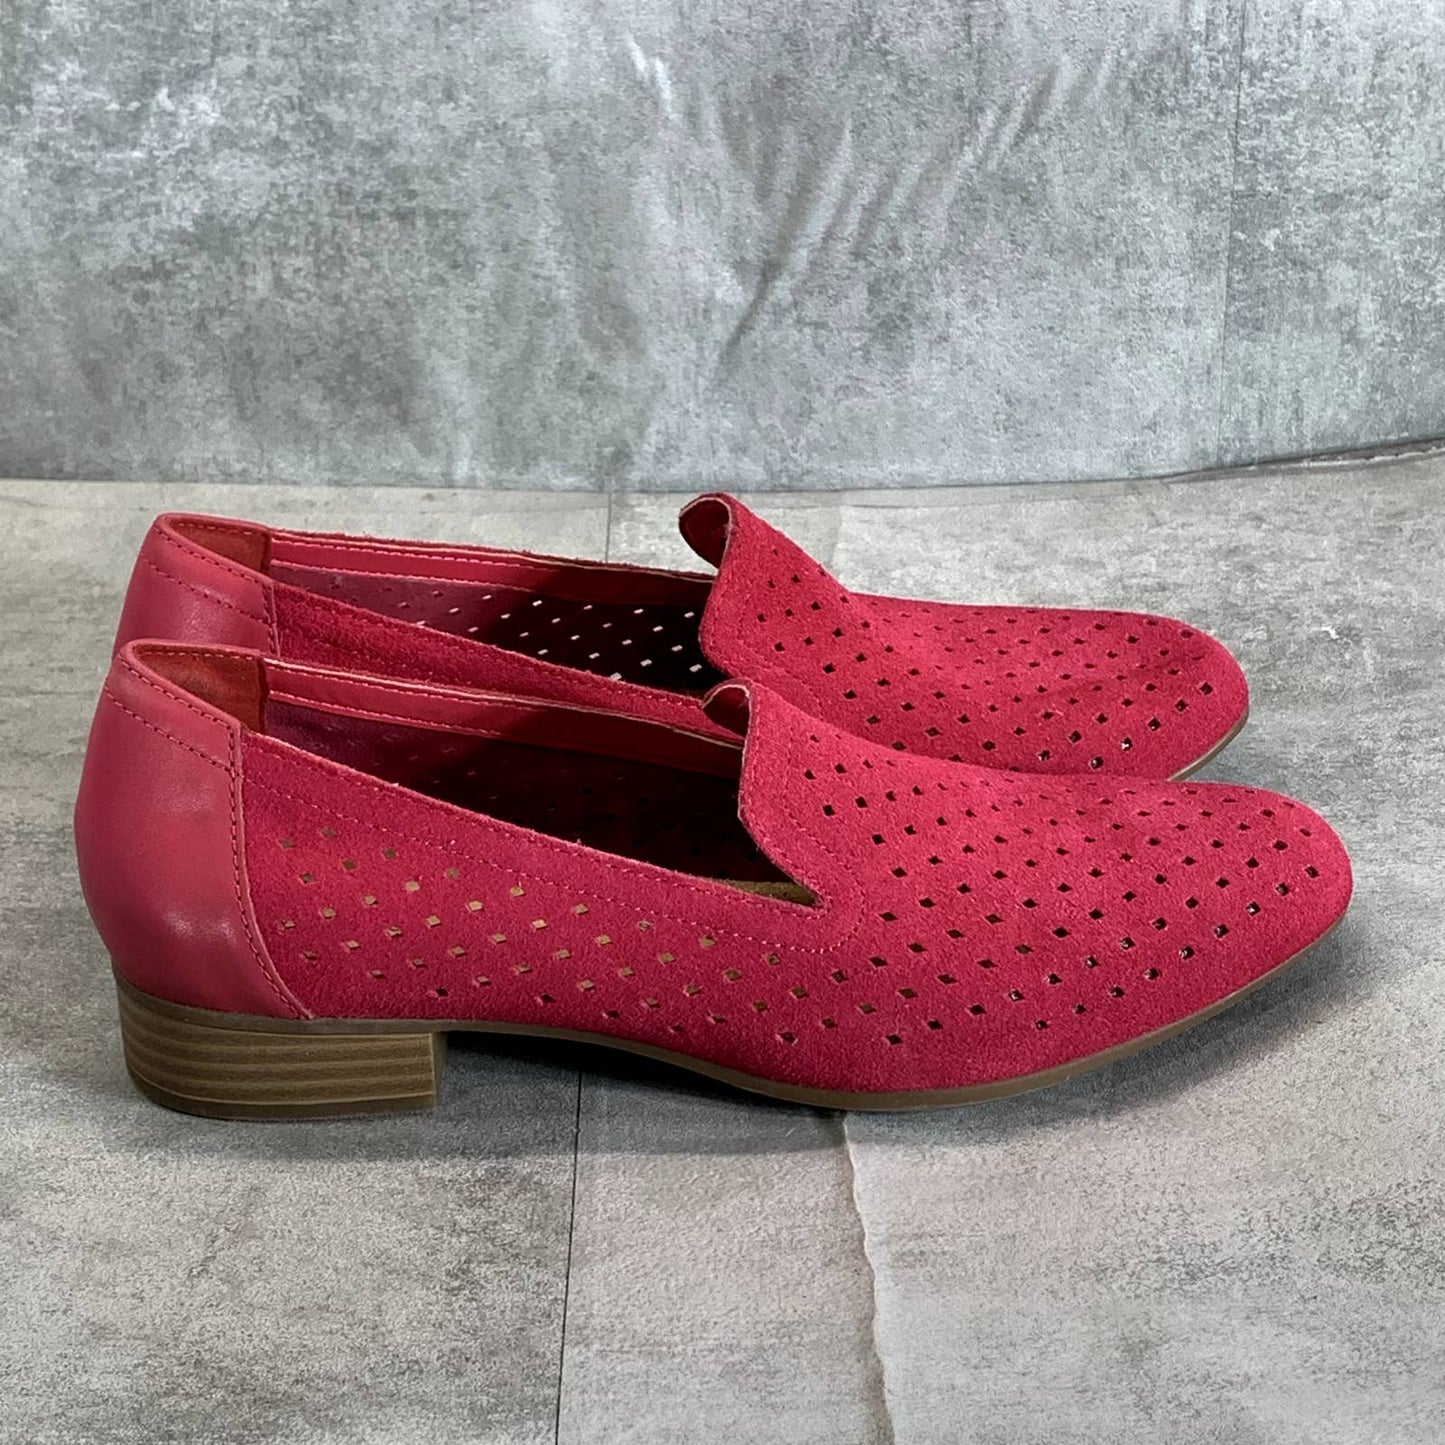 CLARKS COLLECTION Women's Fuchsia Suede Juliet Hayes Perforated Loafers SZ 8